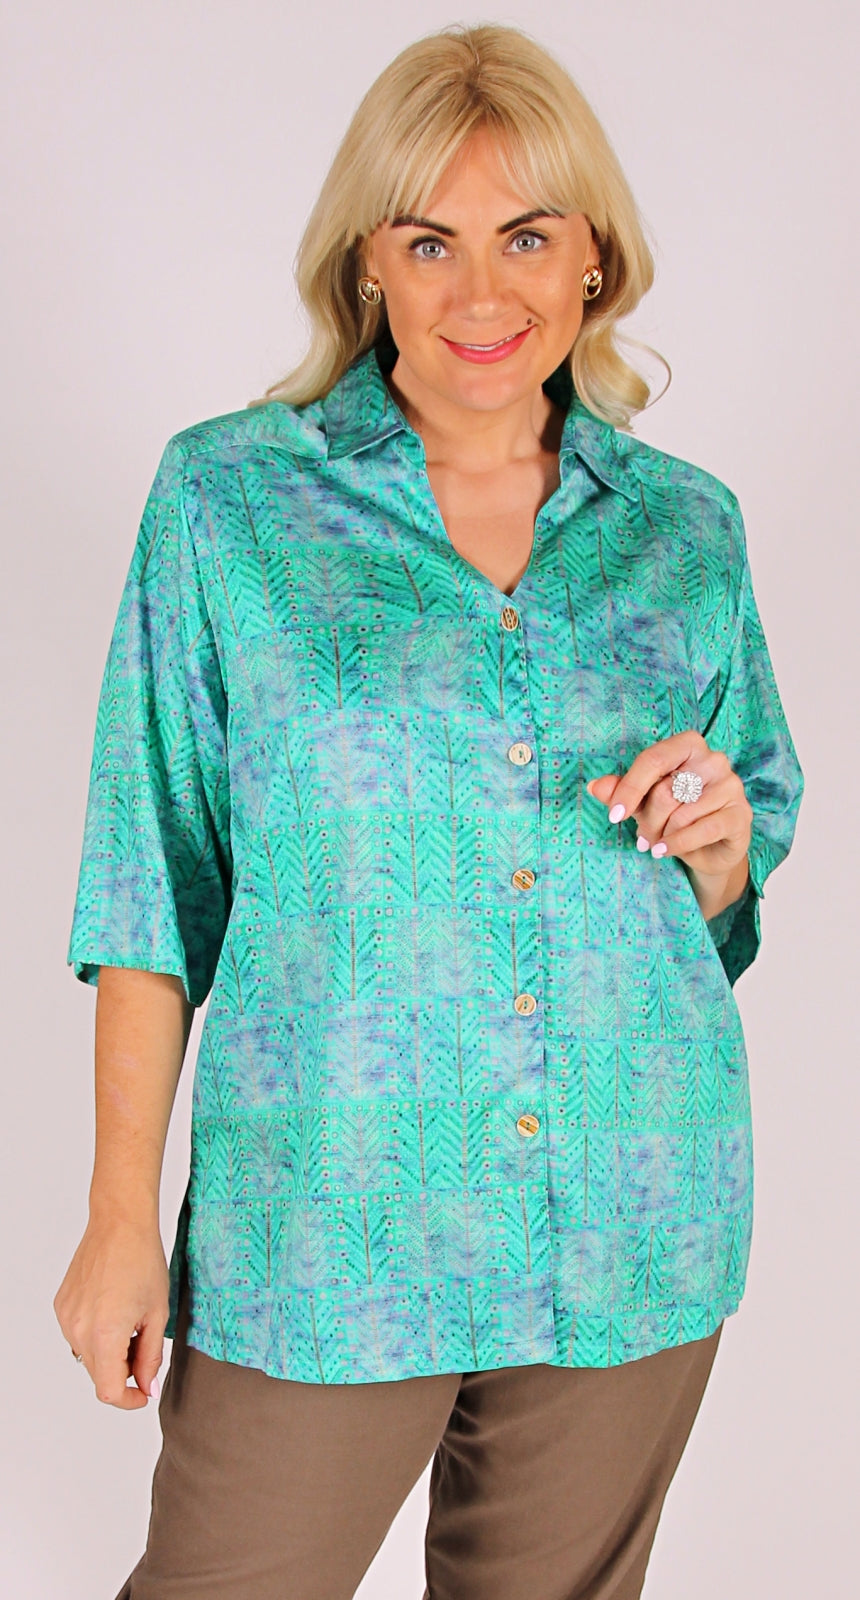 Swiss Cotton Shaped Neck Blouse Teal